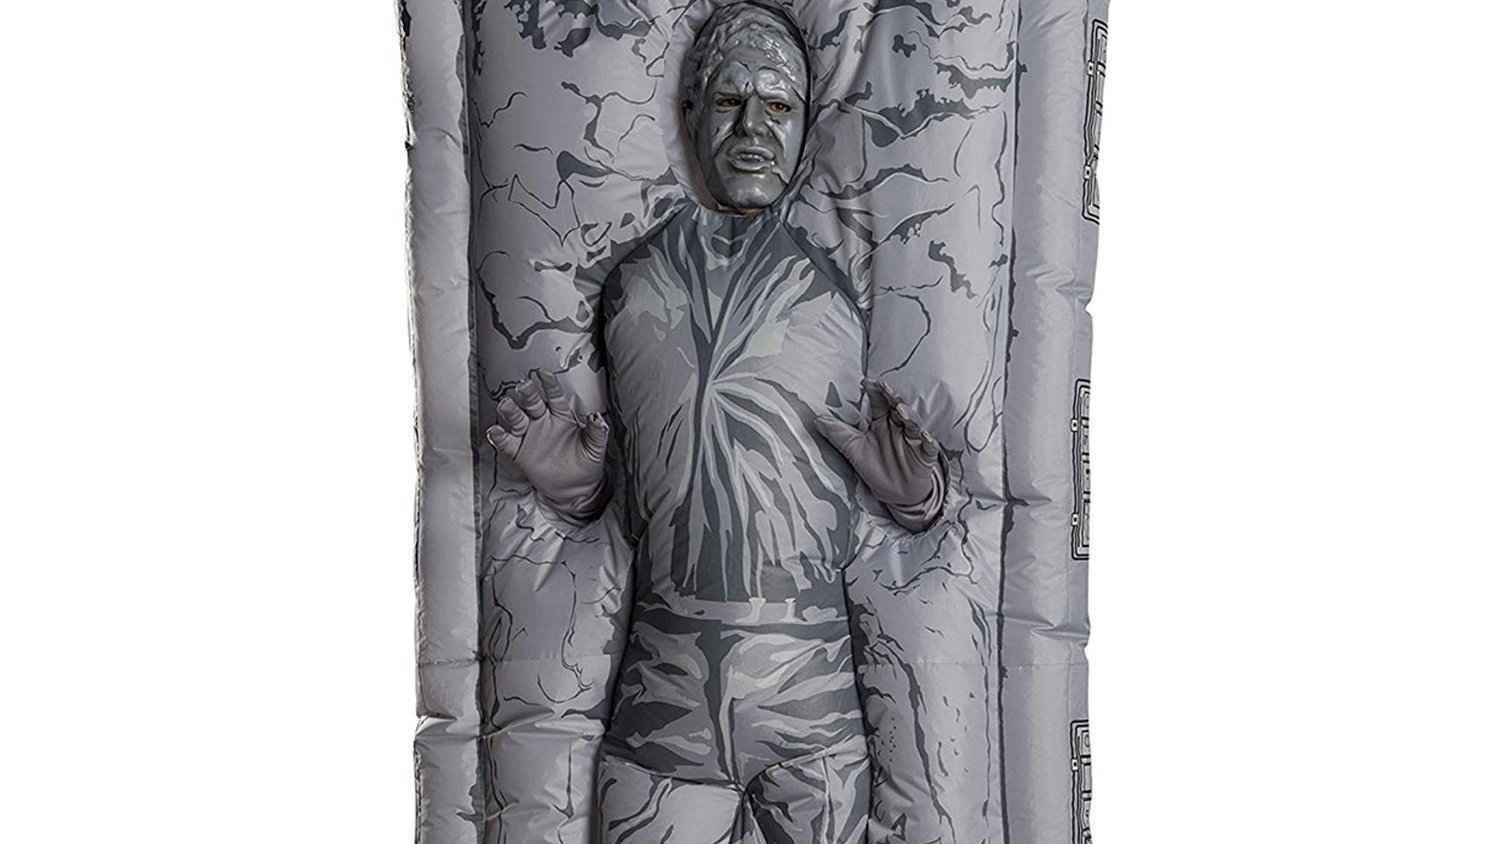 I Present To You The Inflatable Han Solo Frozen In Carbonite